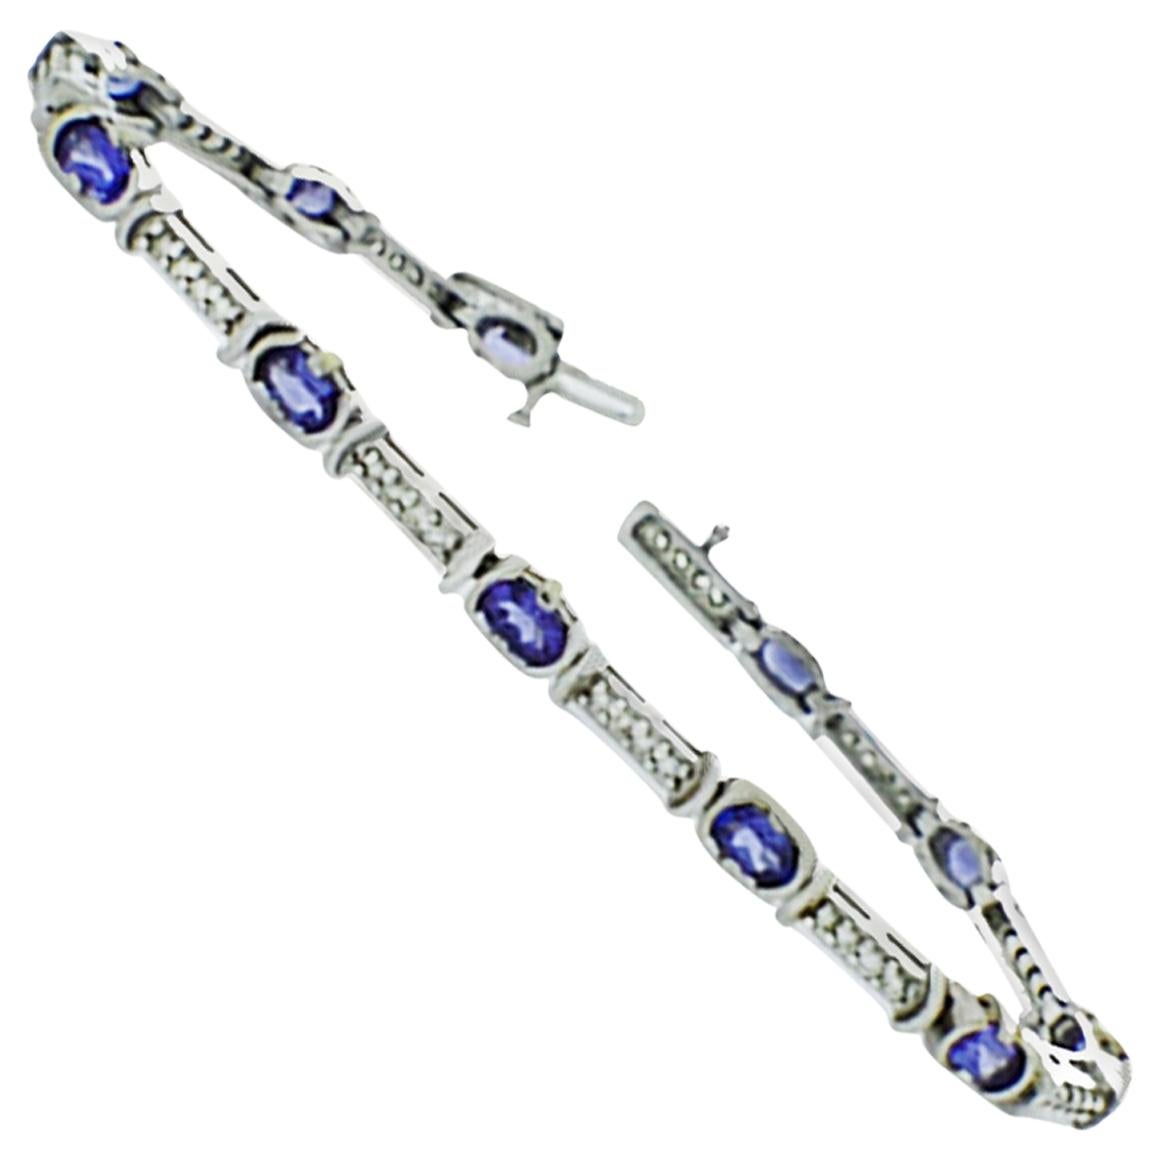 
Diamond and Tanzanite, Tennis Bracelet designed as a link style with tube -Set gemstones set in a 14 Karat white gold setting.
Total 7 inches in length tennis bracelet has alternating tanzanite and diamonds. 

(11) oval shaped Tanzanite gemstones